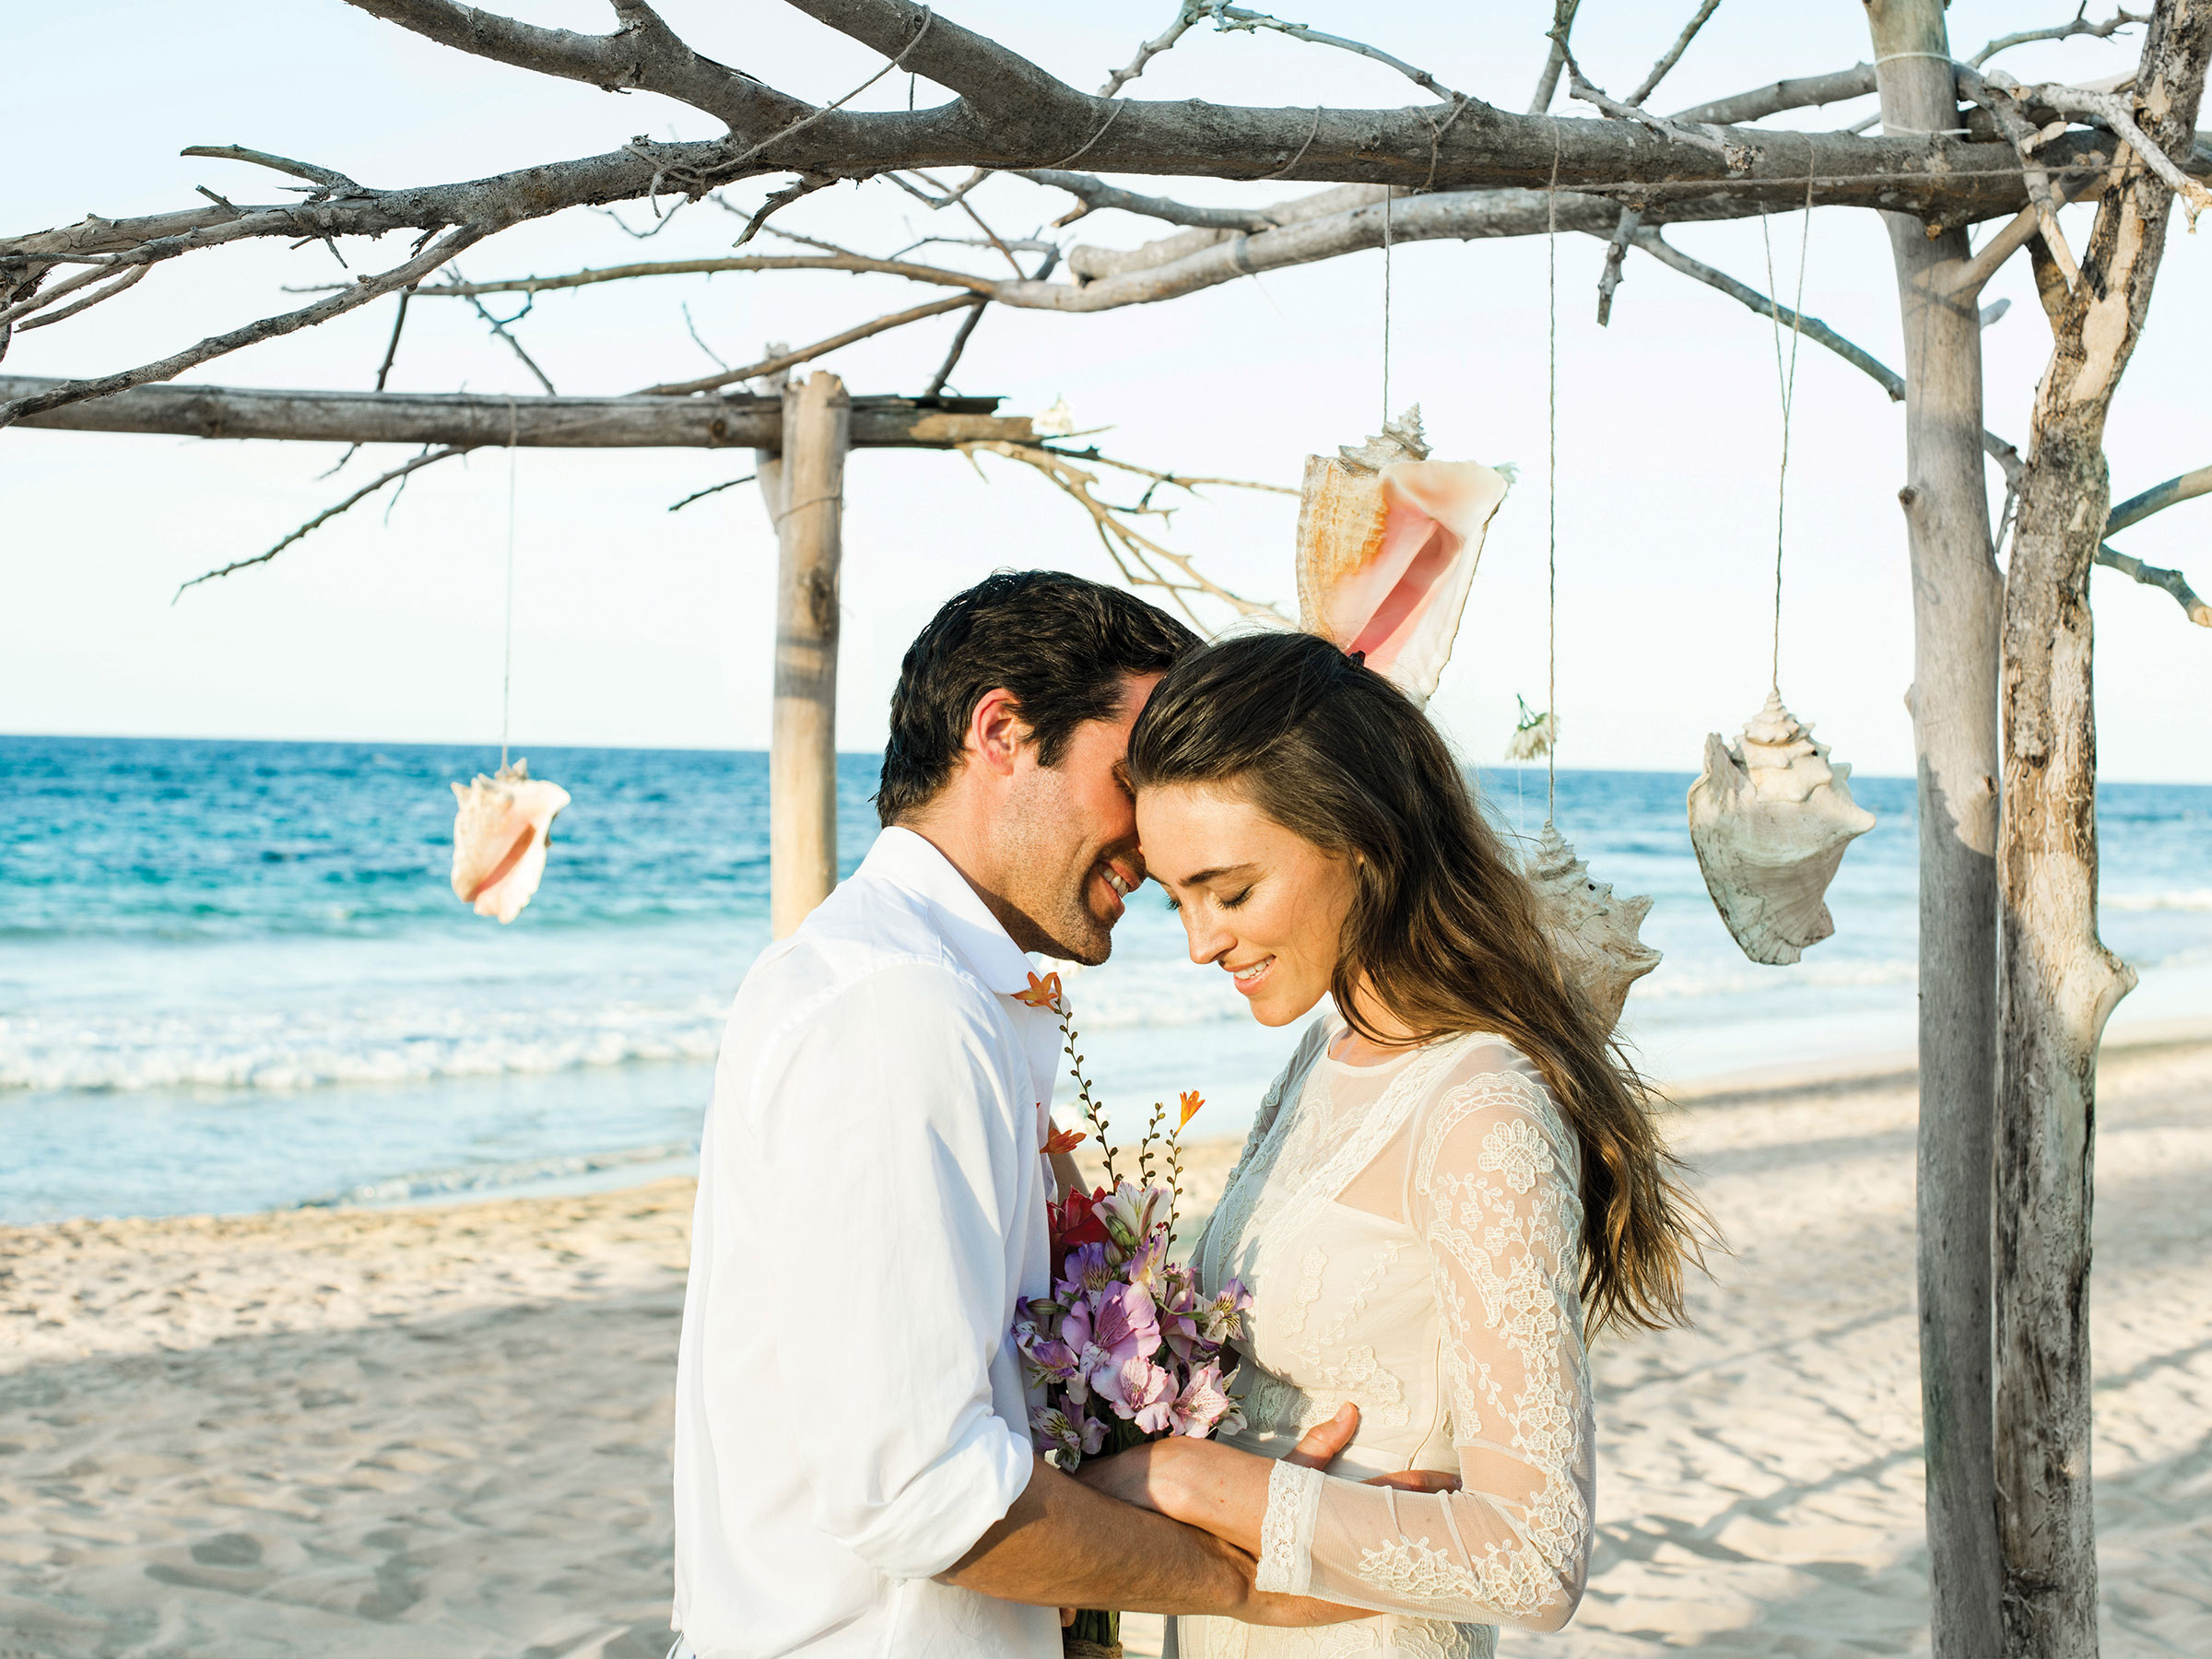 Excellence Punta Cana the Best Resort to Renew Your Wedding Vows